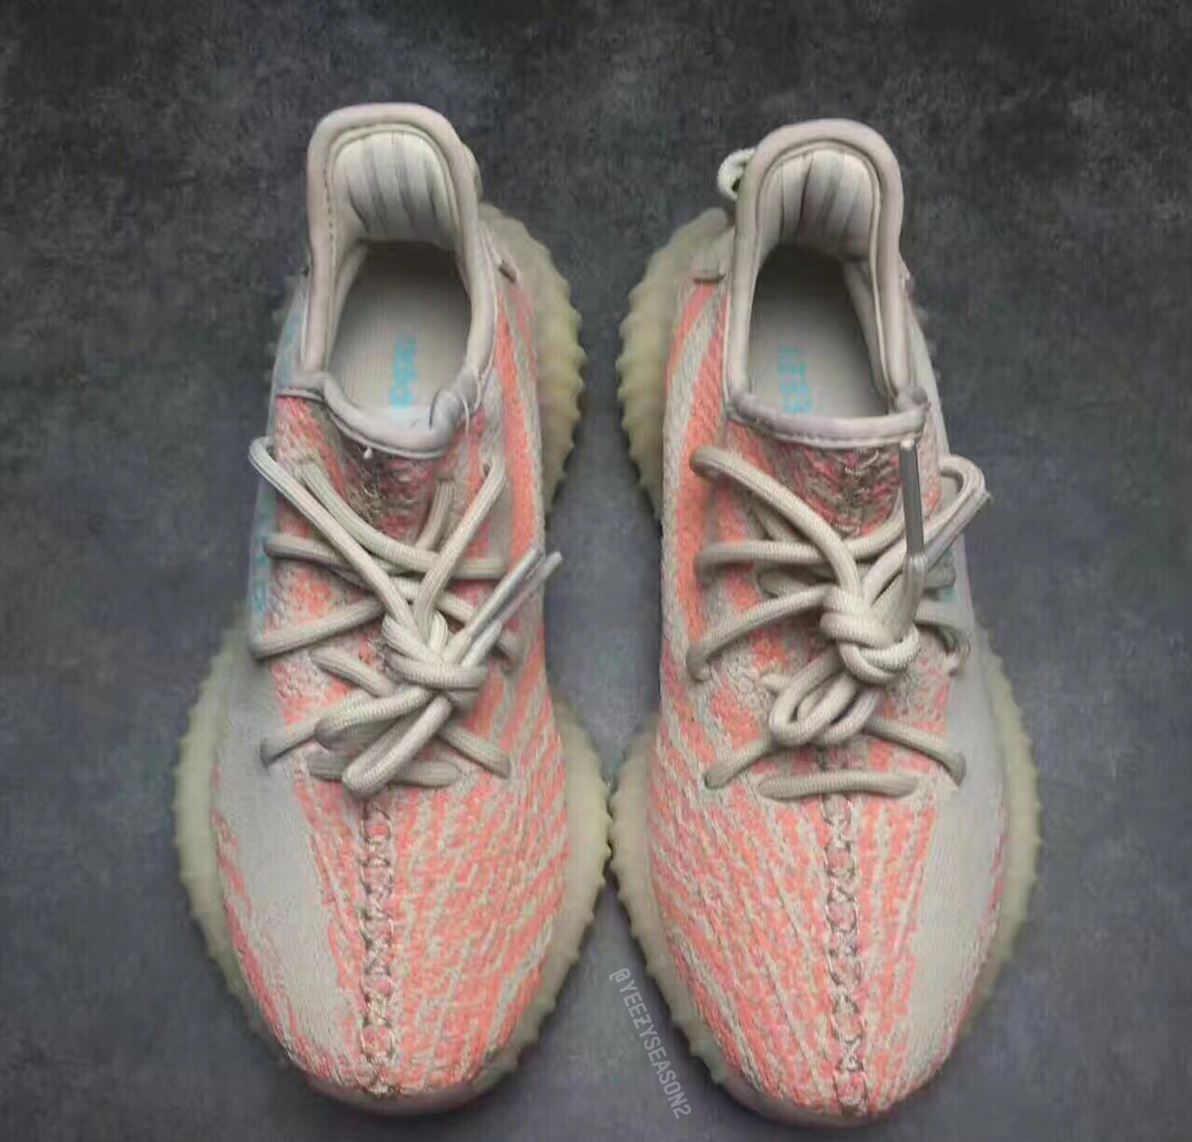 yeezy 350 coral